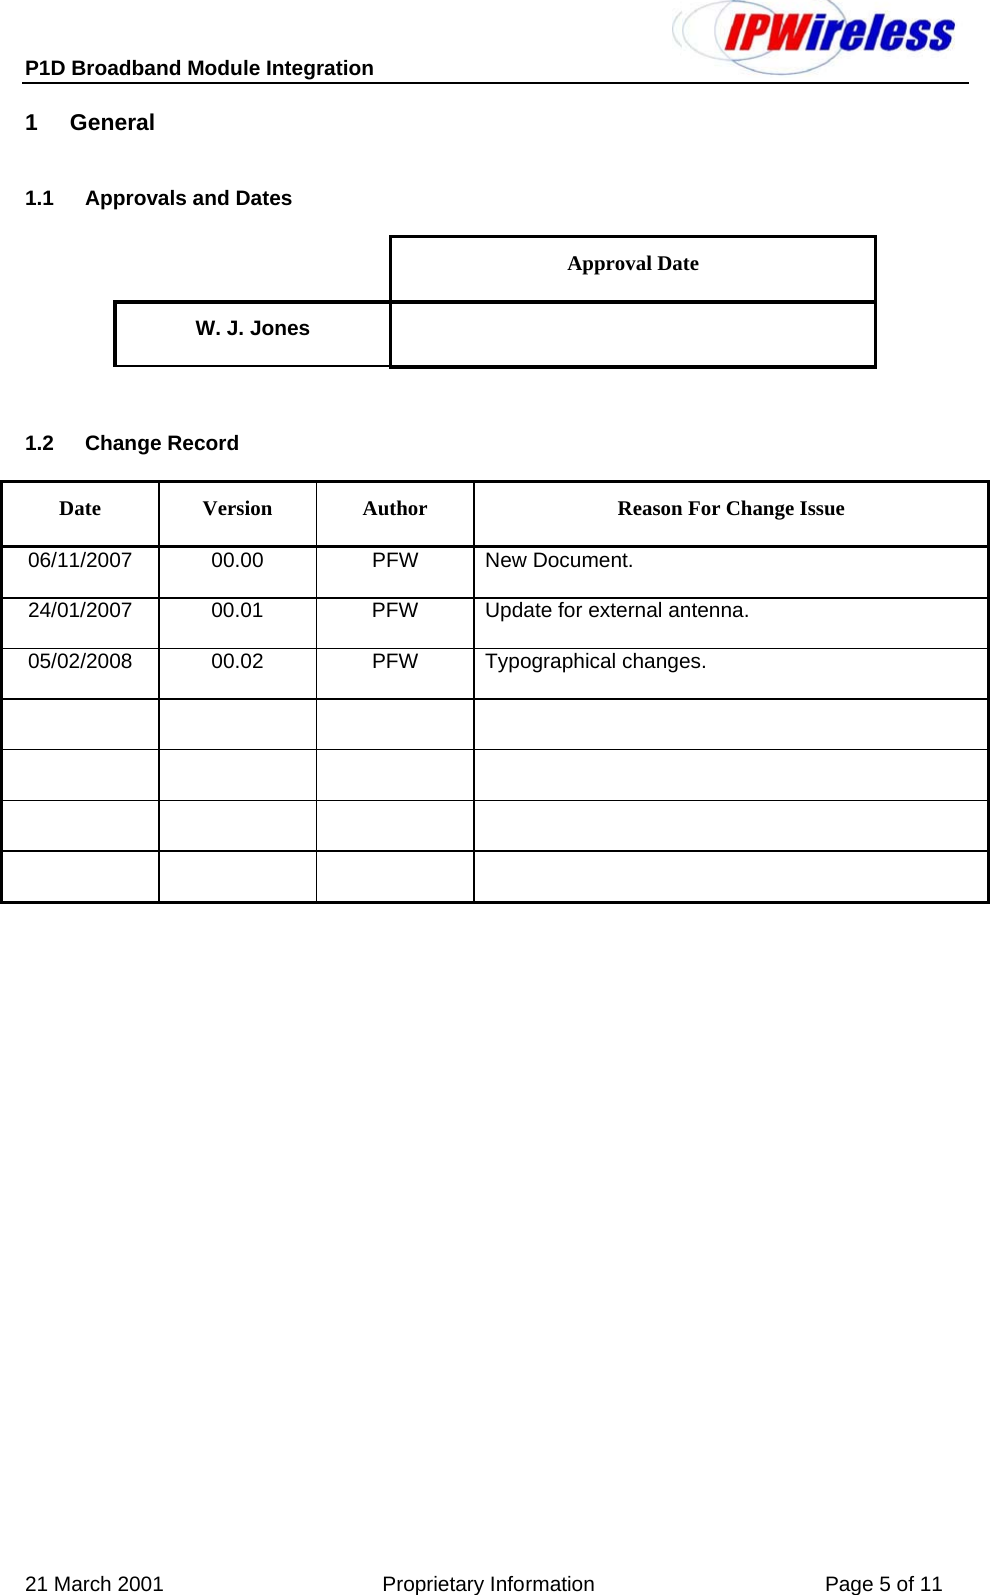 P1D Broadband Module Integration     21 March 2001                                      Proprietary Information                                        Page 5 of 11 1  General   1.1  Approvals and Dates  Approval Date W. J. Jones    1.2 Change Record Date  Version  Author  Reason For Change Issue 06/11/2007 00.00  PFW New Document. 24/01/2007  00.01  PFW  Update for external antenna. 05/02/2008 00.02  PFW Typographical changes.                   